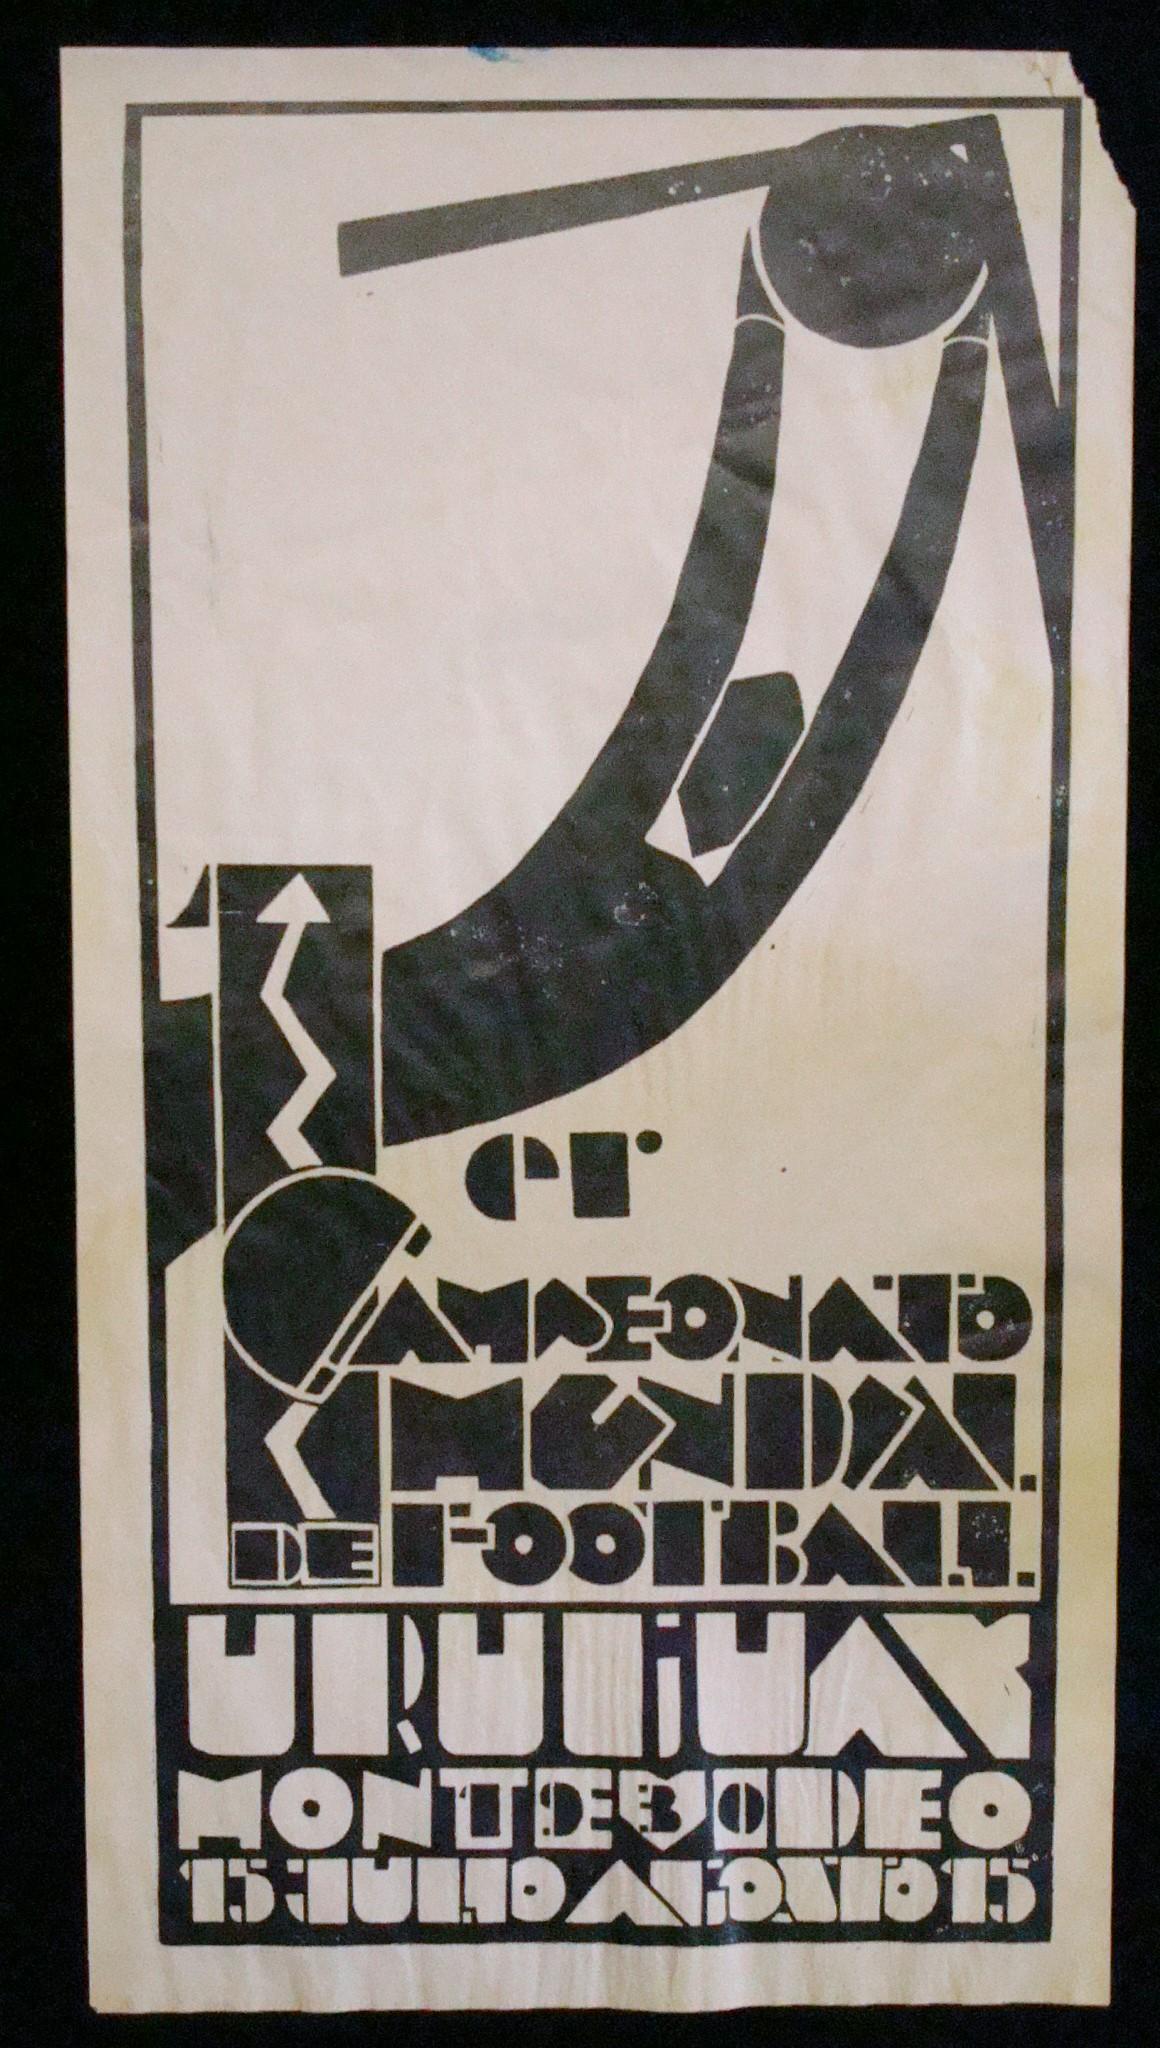 Official Uruguay 1930 F.I.F.A. World Cup Poster, Art Deco Football, Soccer, 
92 year-old poster for the first World Cup, held in Uruguay in 1930. Poster reads in Spanish: ''Soccer World Championship / Montevideo, Uruguay / 15 July - 15 August''.